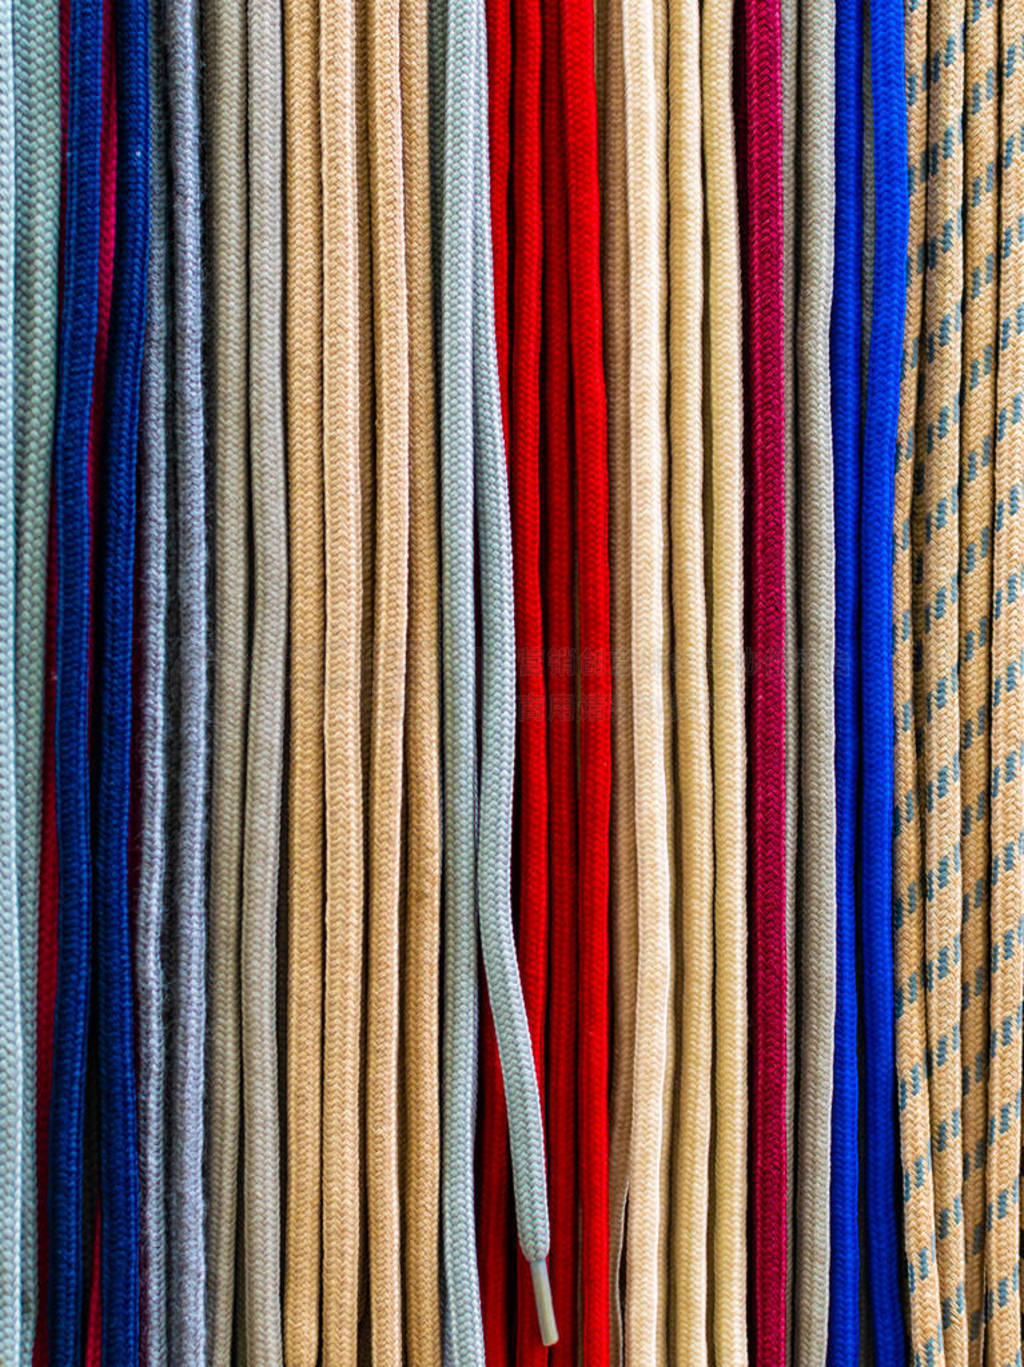 Various new shoe laces on display